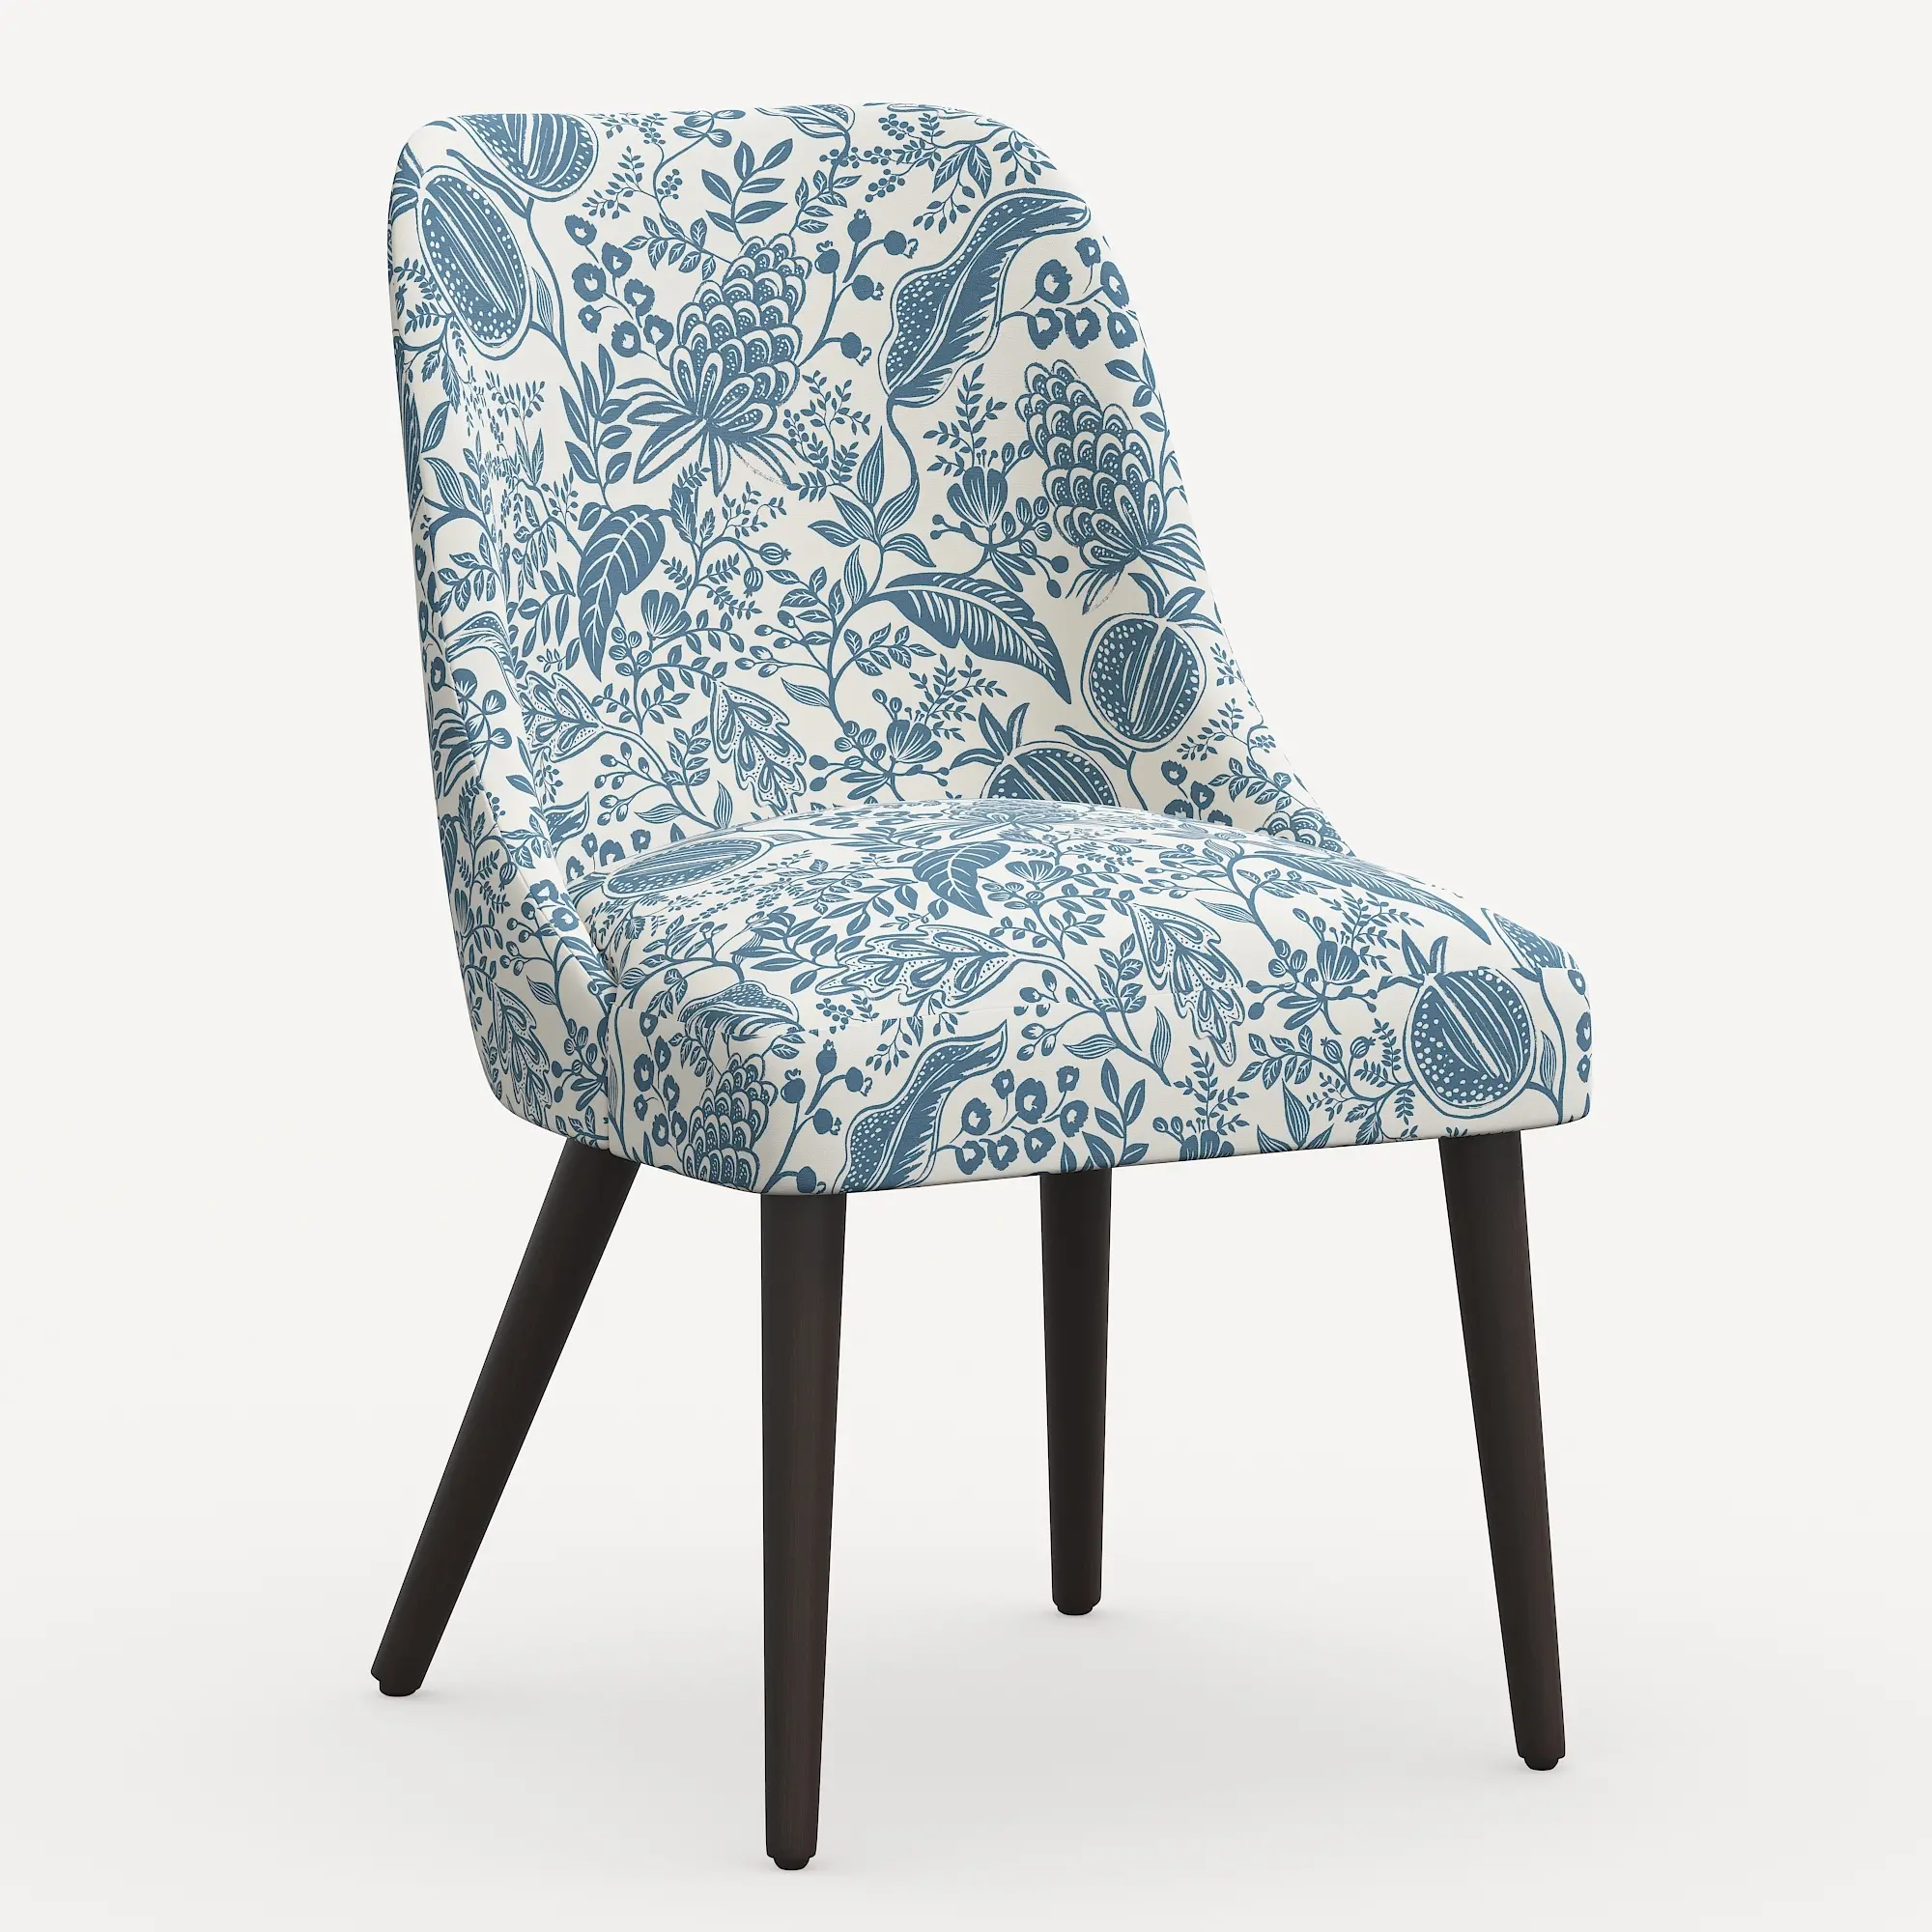 Rifle Paper Co. Clare Blue Pomegranate Dining Chair